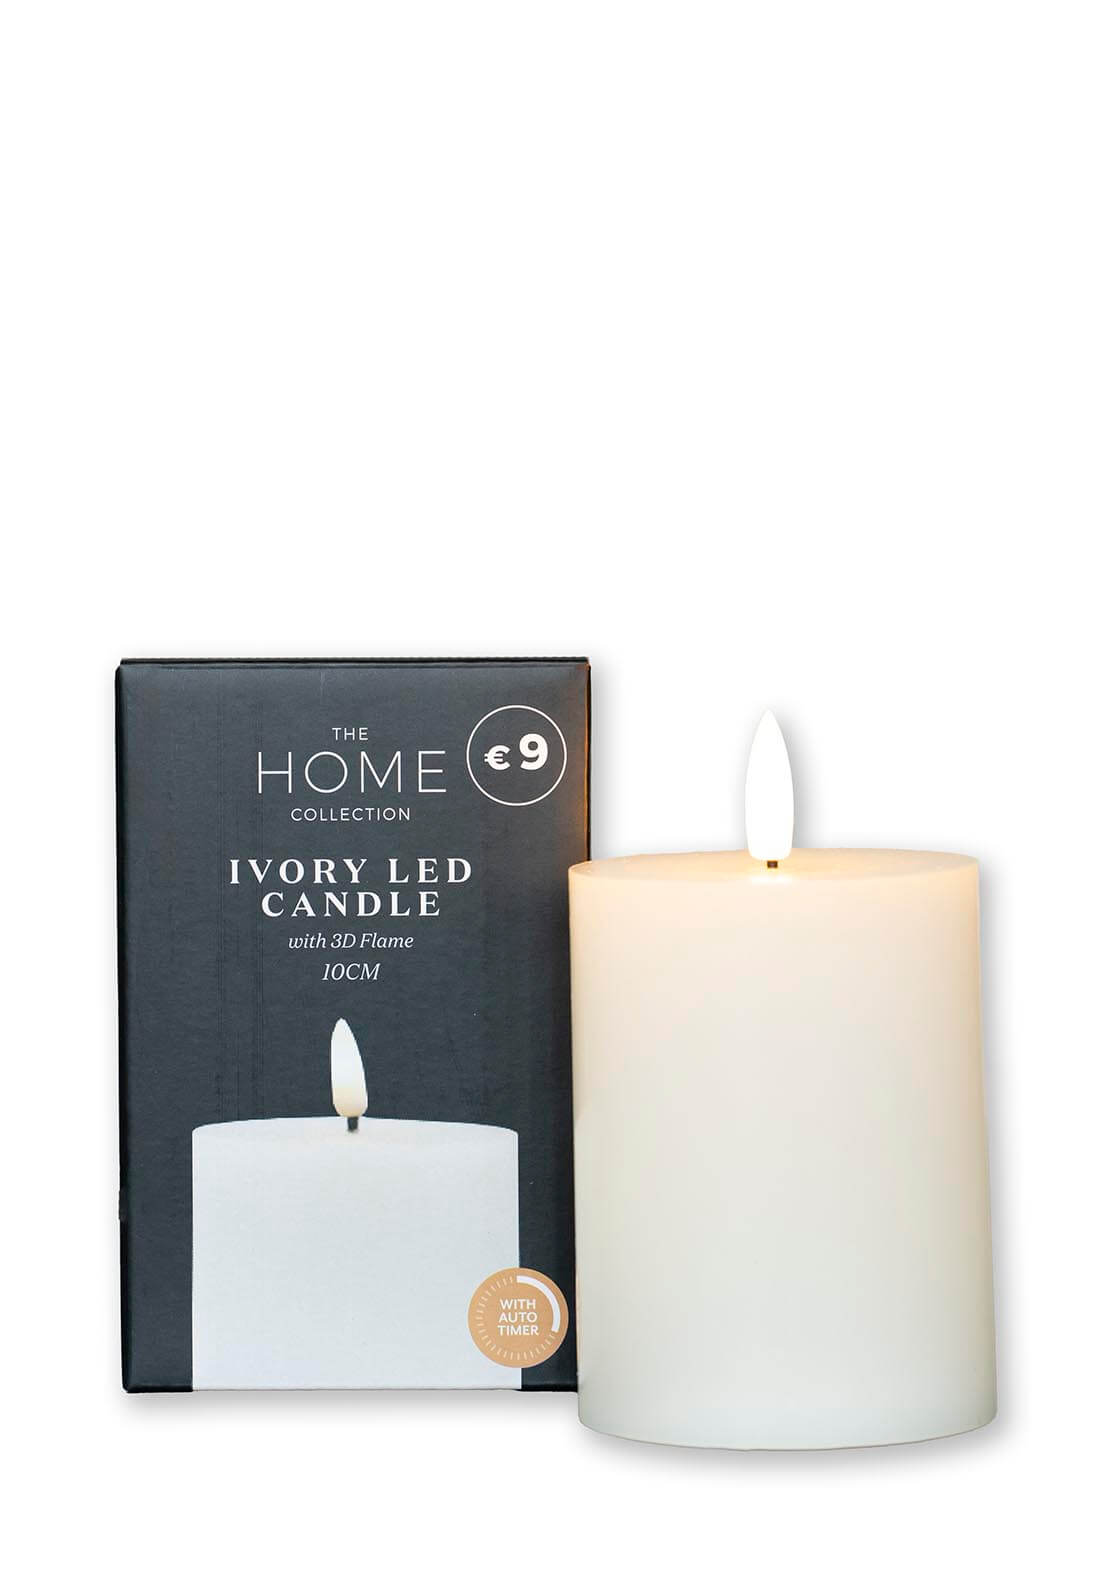 The Home Collection 3D-Flame LED Candle 10cm With 6 Hour Timer - Ivory 1 Shaws Department Stores